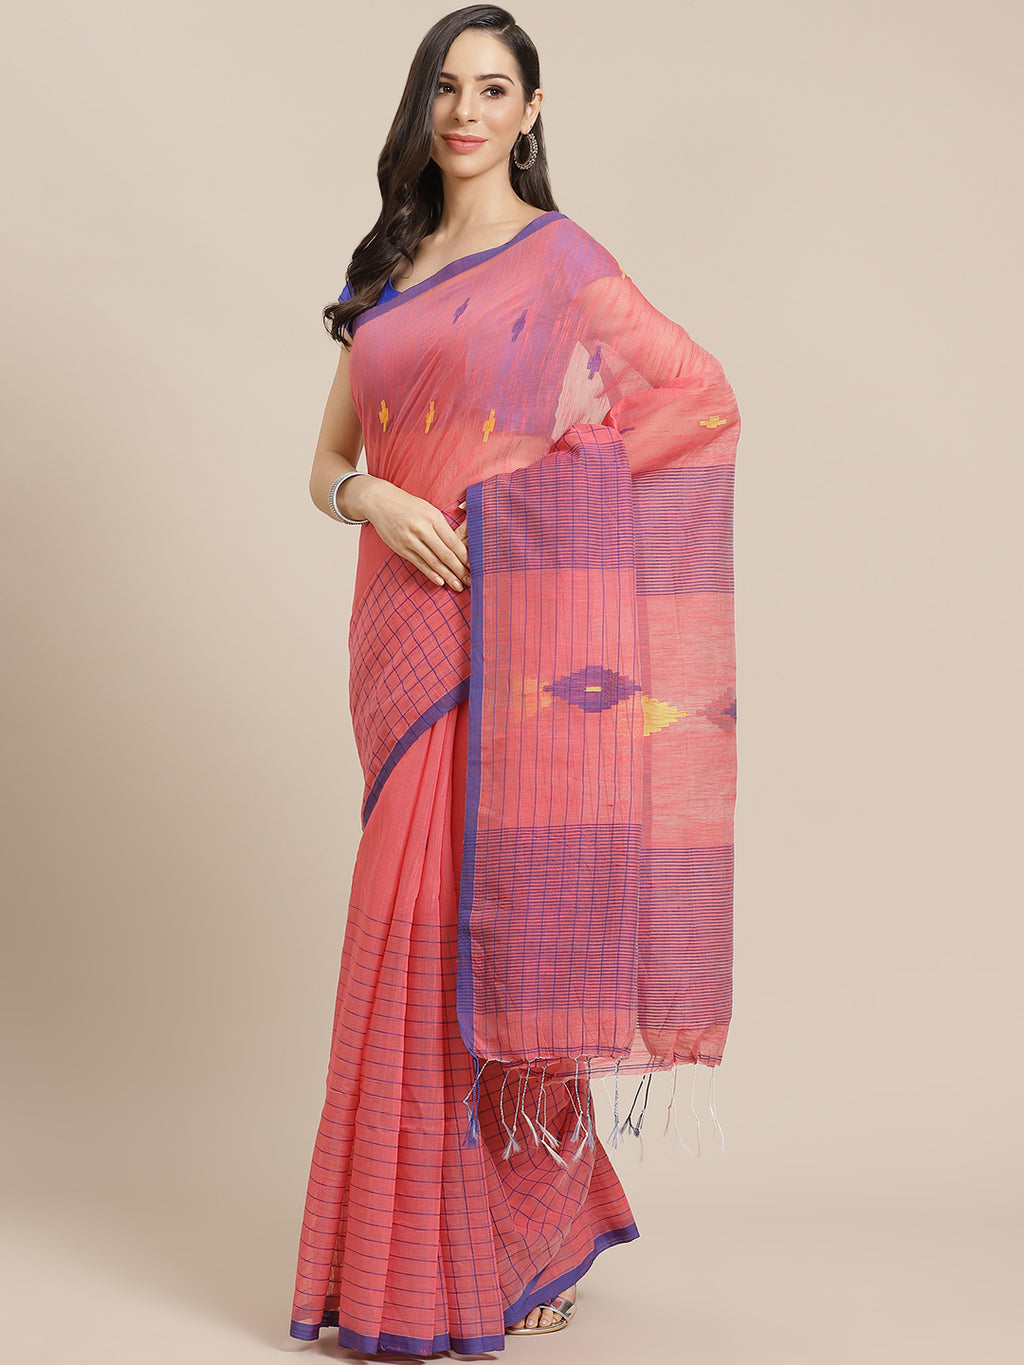 Pink and Purple, Kalakari India Ikat Silk Cotton Woven Design Saree with Blouse SHBESA0050-Saree-Kalakari India-SHBESA0050-Bengal, Cotton, Geographical Indication, Hand Crafted, Heritage Prints, Ikkat, Natural Dyes, Red, Sarees, Sustainable Fabrics, Woven, Yellow-[Linen,Ethnic,wear,Fashionista,Handloom,Handicraft,Indigo,blockprint,block,print,Cotton,Chanderi,Blue, latest,classy,party,bollywood,trendy,summer,style,traditional,formal,elegant,unique,style,hand,block,print, dabu,booti,gift,present,g